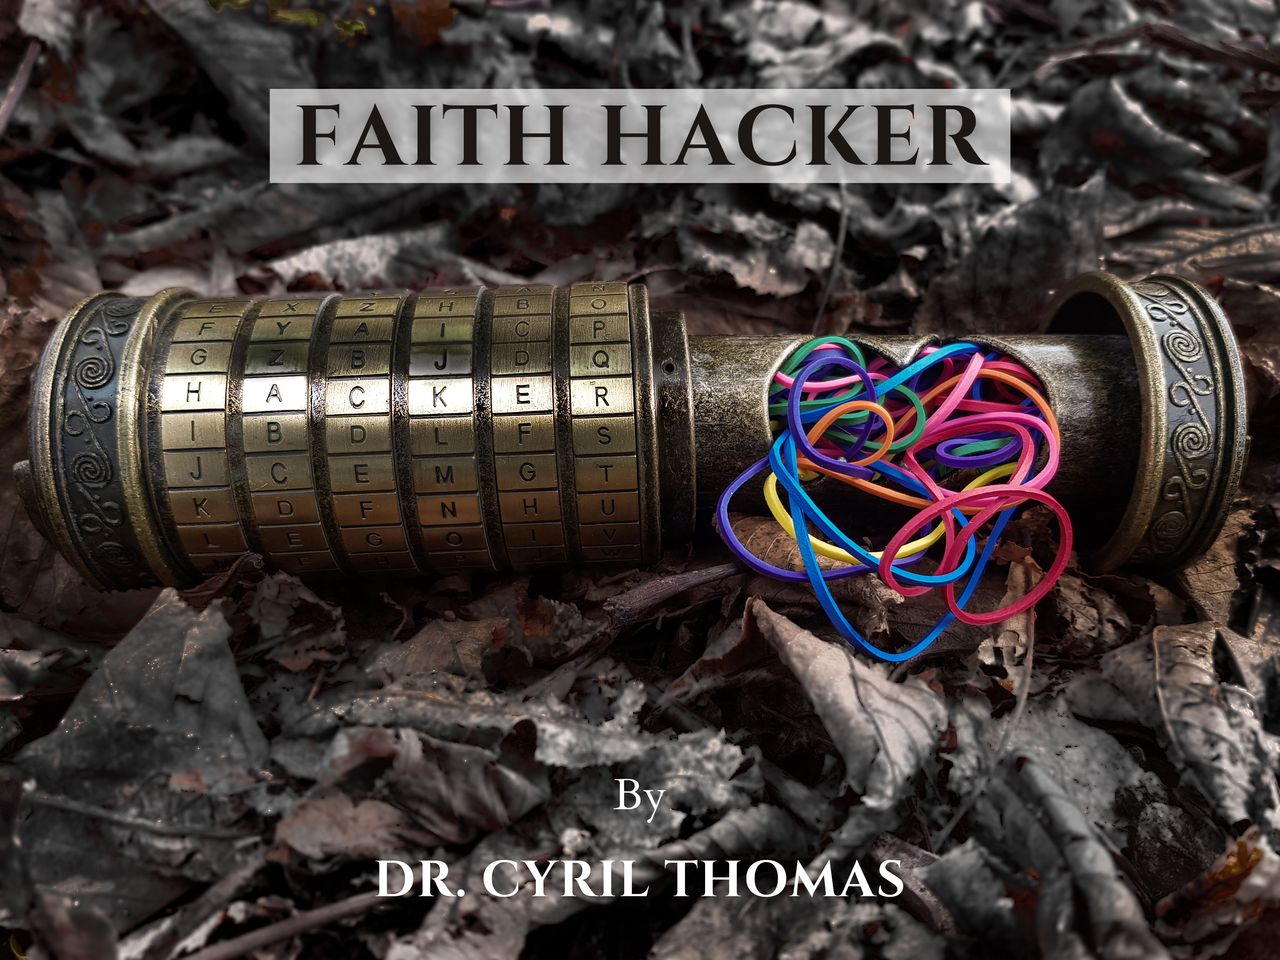 Faith Hacker by Dr. Cyril Thomas (MP4 Video Download)